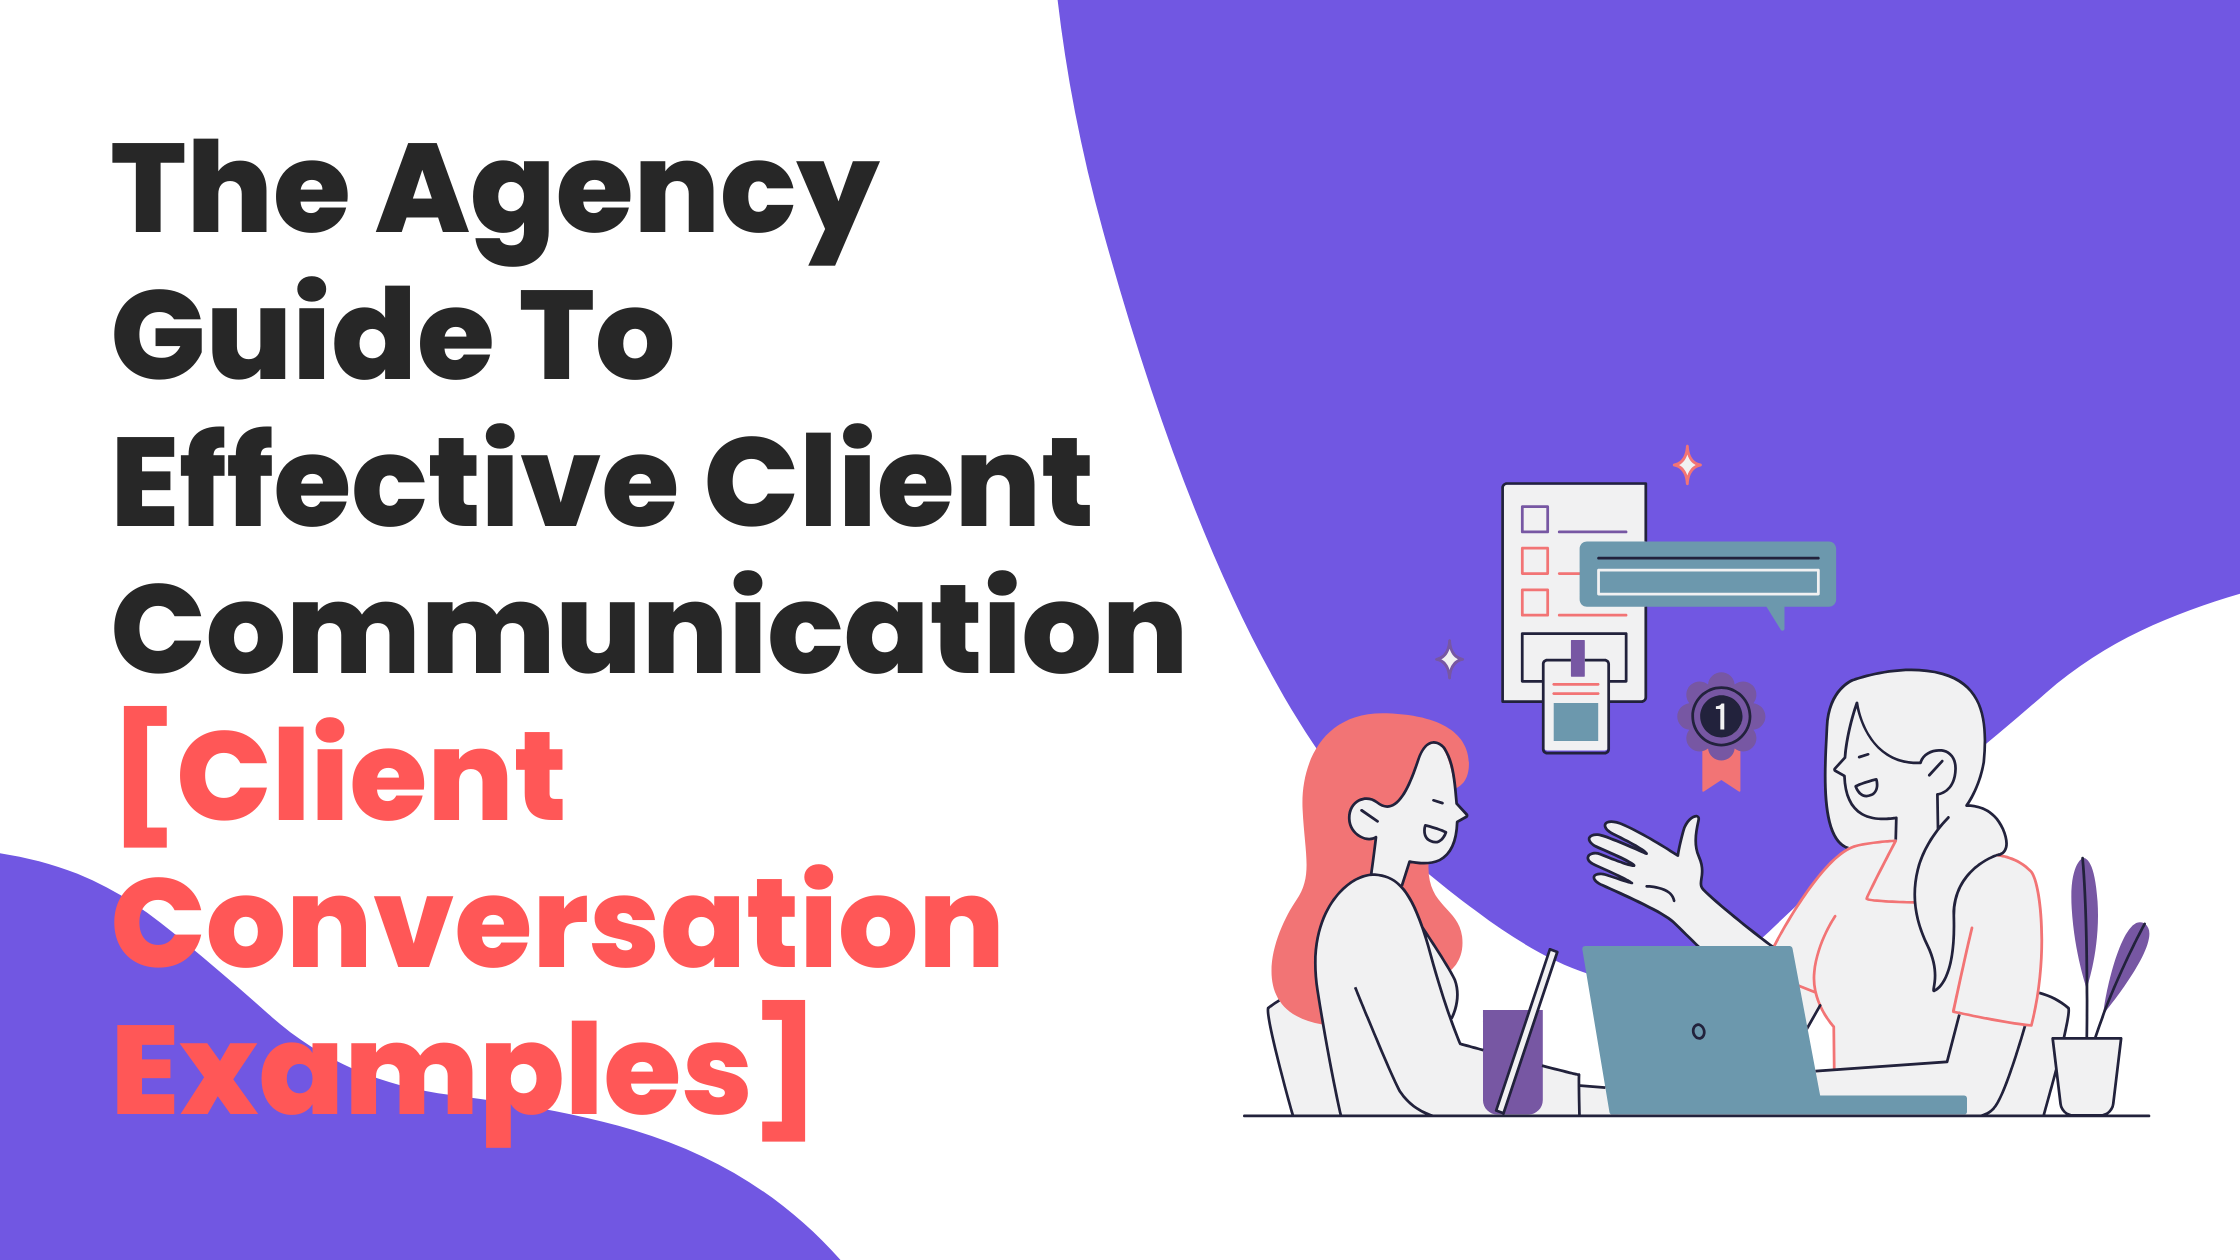 The Agency Guide To Effective Client Communication [Client Conversation Examples]